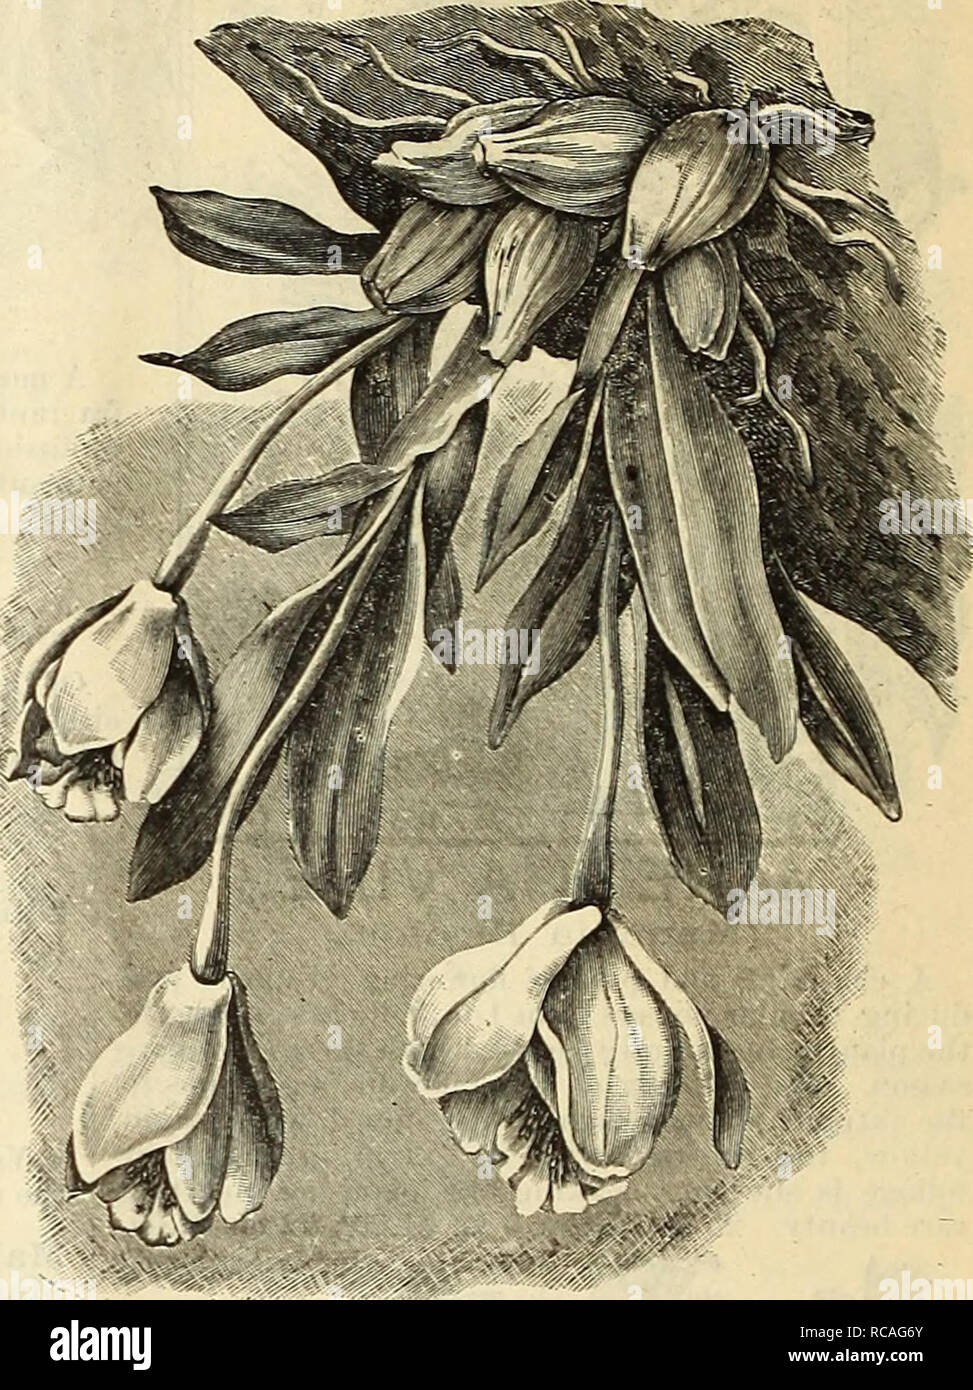 . Dreer's autumn bulb catalogue : 1891. Bulbs (Plants) Catalogs; Flowers Seeds Catalogs; Gardening Equipment and supplies Catalogs; Nurseries (Horticulture) Catalogs. 32 E)REER'S ^UTUMN CATALOGUE. 1891 *OReHiDS. F OE the convenience of those who desire a few orchids for trial we offer the following sets at a considera- ble reduction from regular rates. The plants are strong, well established, and with ordinary care should prove satisfactory. They cannot be sent by mail. For Cool Greenhouse or House. Bletia Tankervillae. Laelia Anceps. Cypripedium Insigne. &quot; Autumnalis. Cattleya Crtrina. O Stock Photo